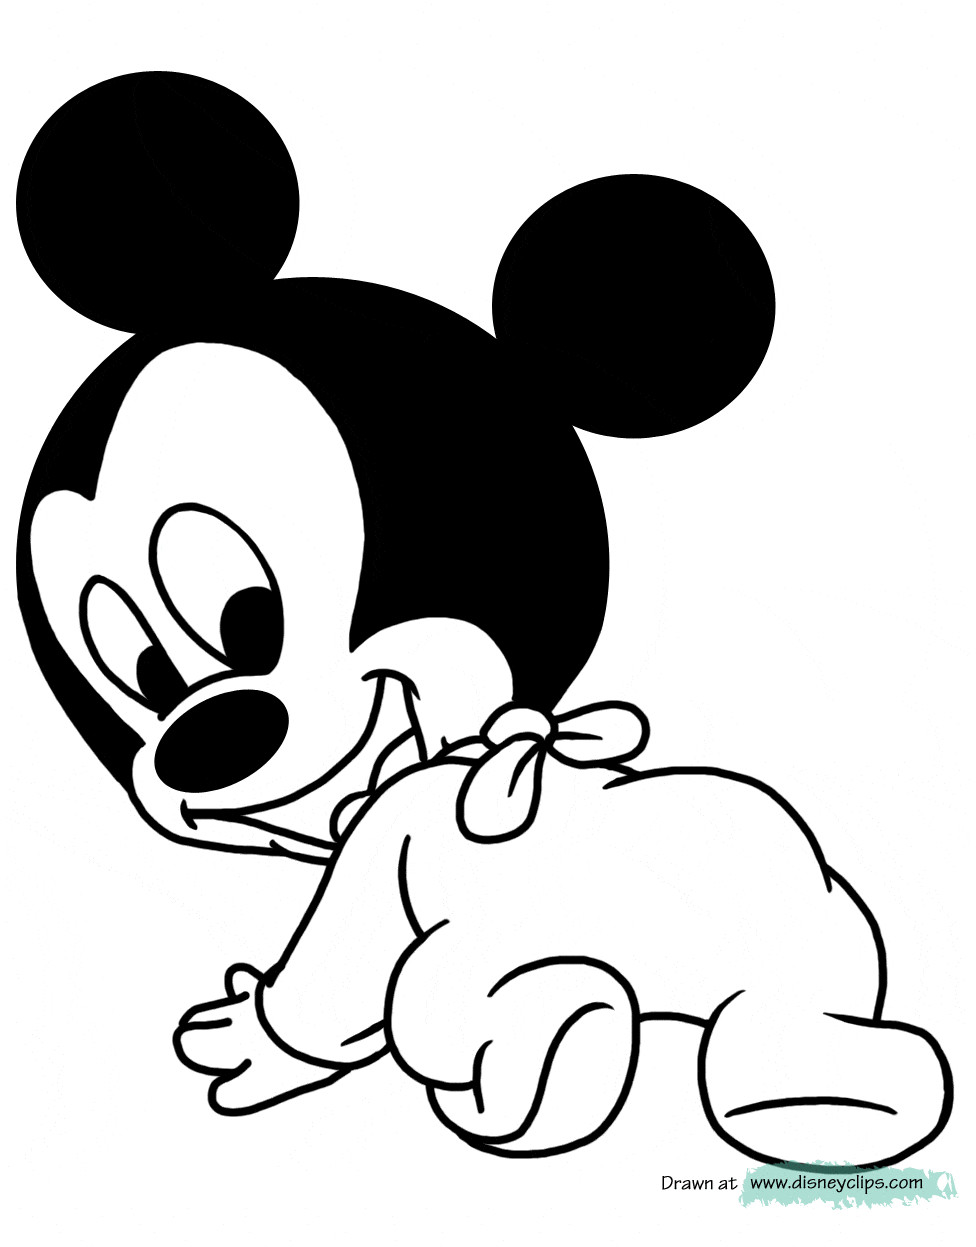 Baby Mickey Mouse Coloring Page
 Disney Babies Printable Coloring Pages